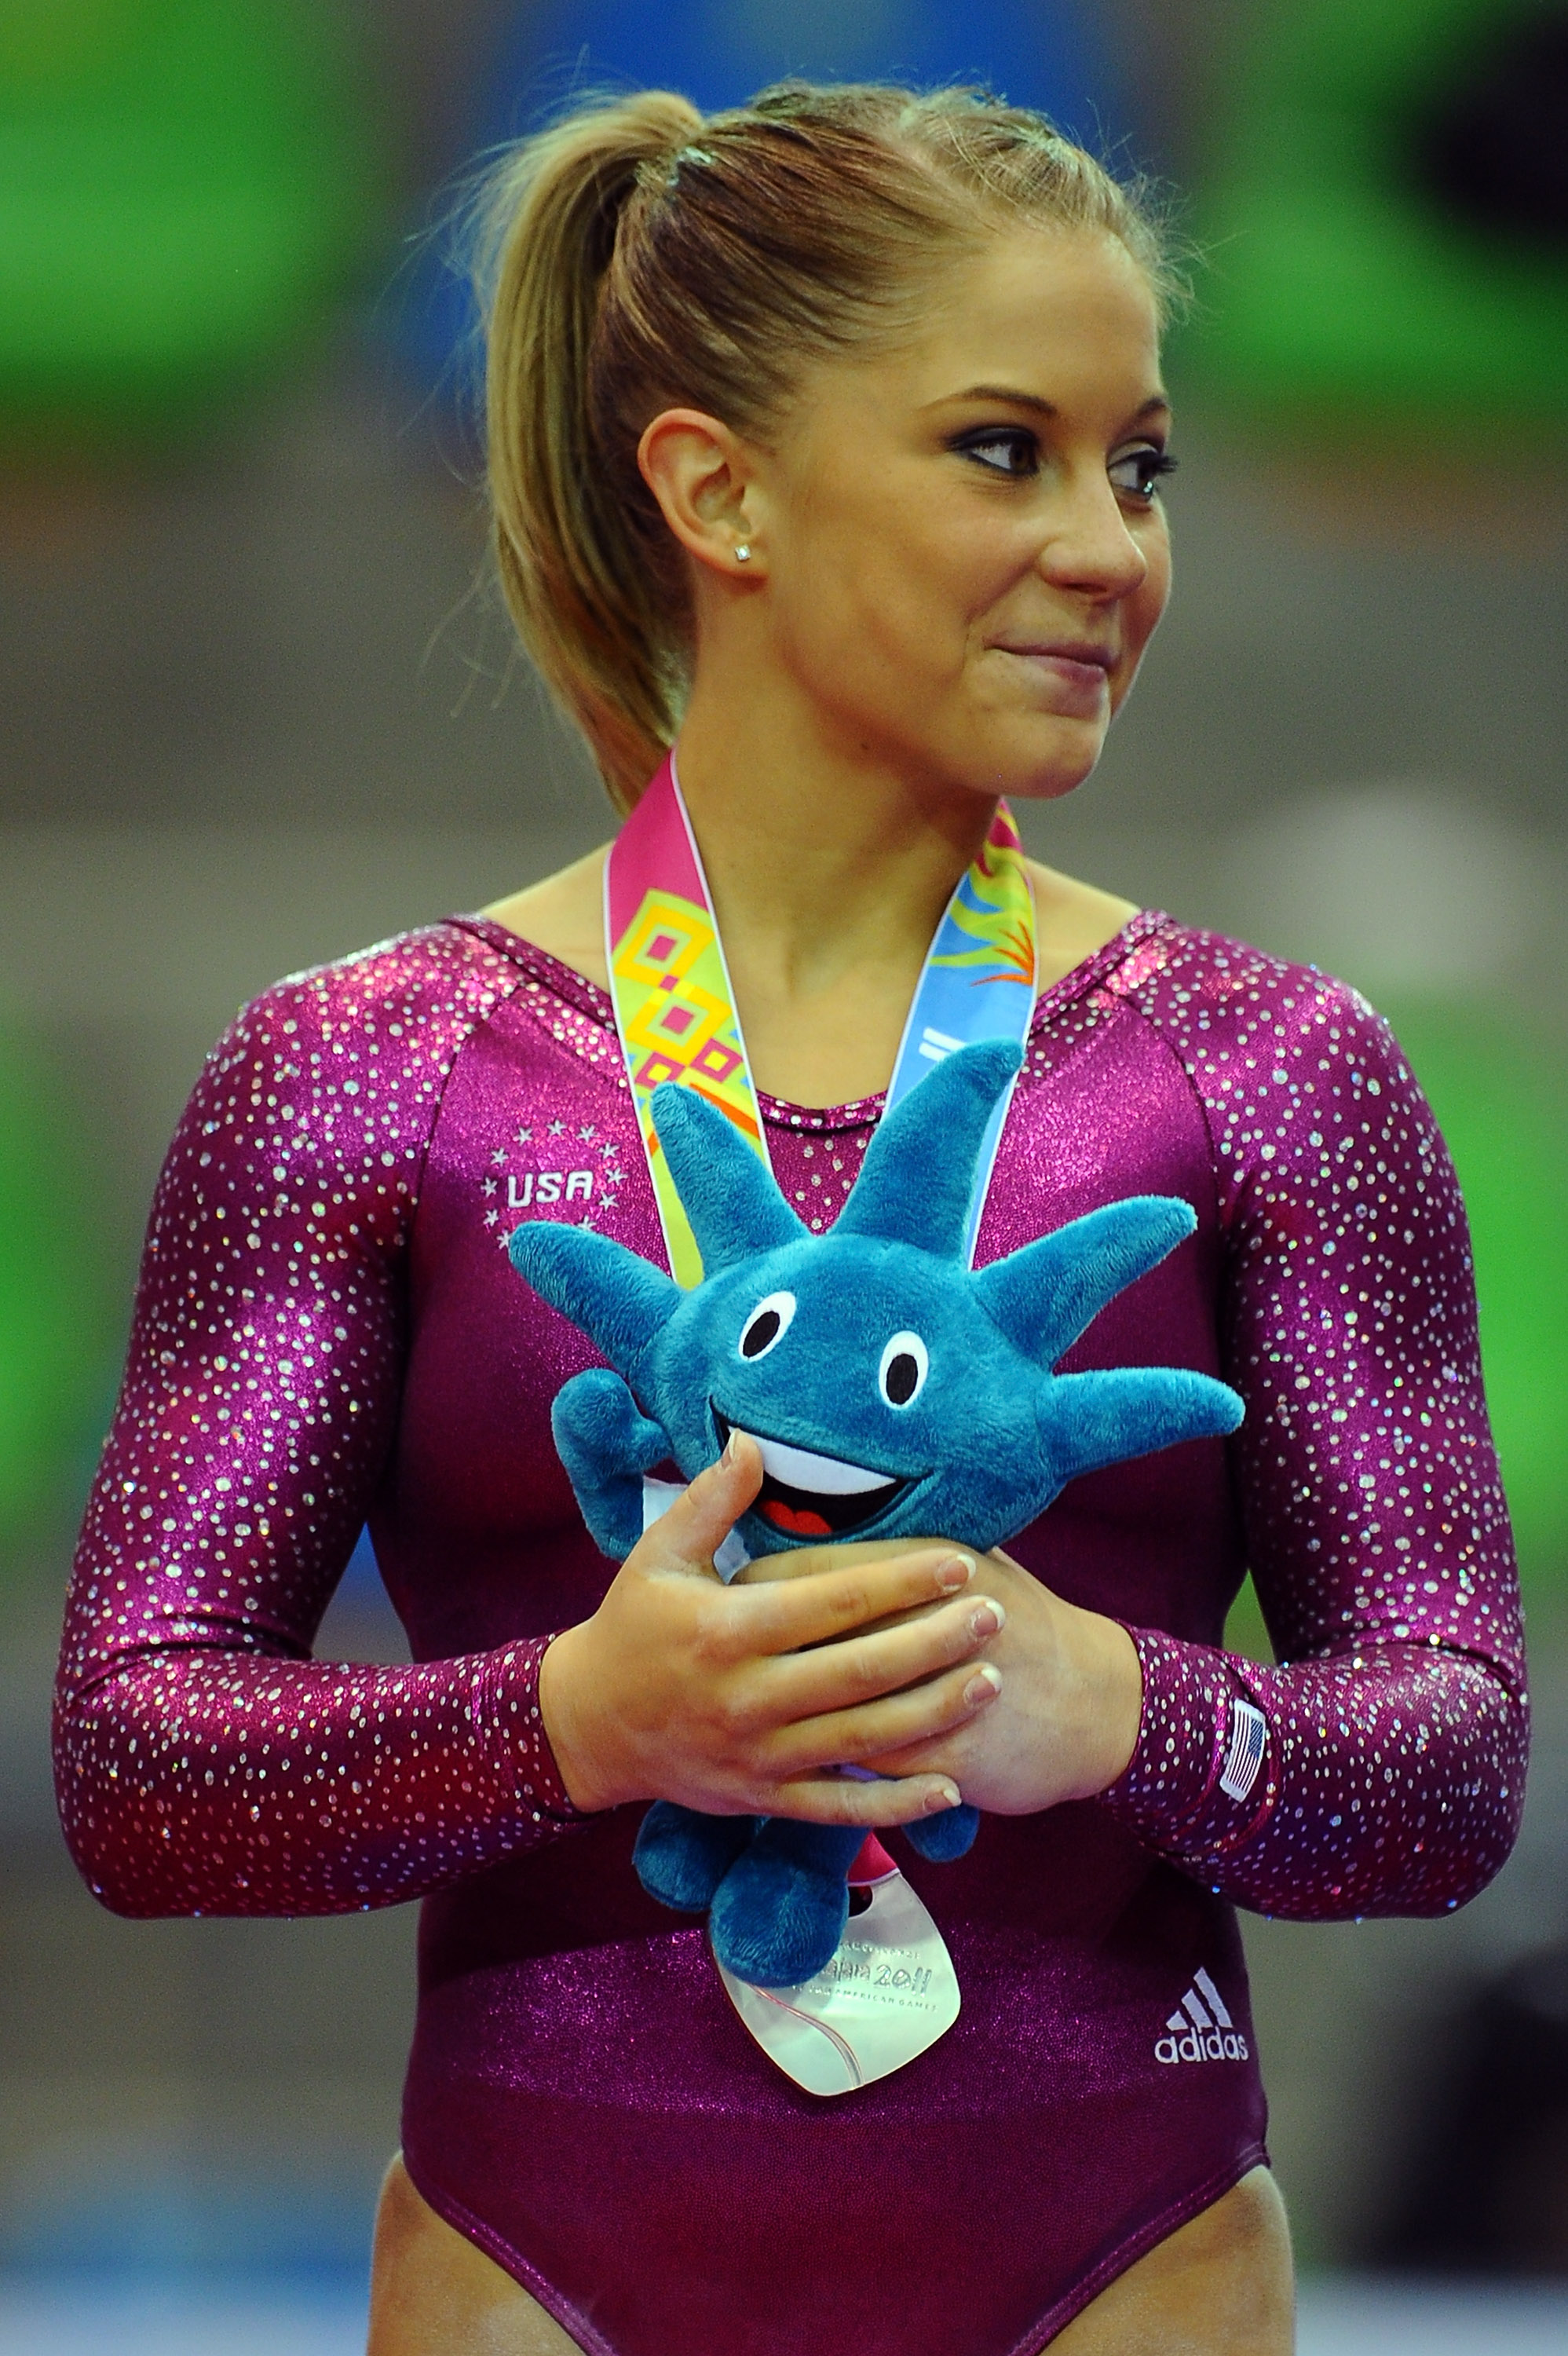 Shawn Johnson at the Women's Artistic Gymnastics Finals in Mexico in 2011 | Source: Getty Images